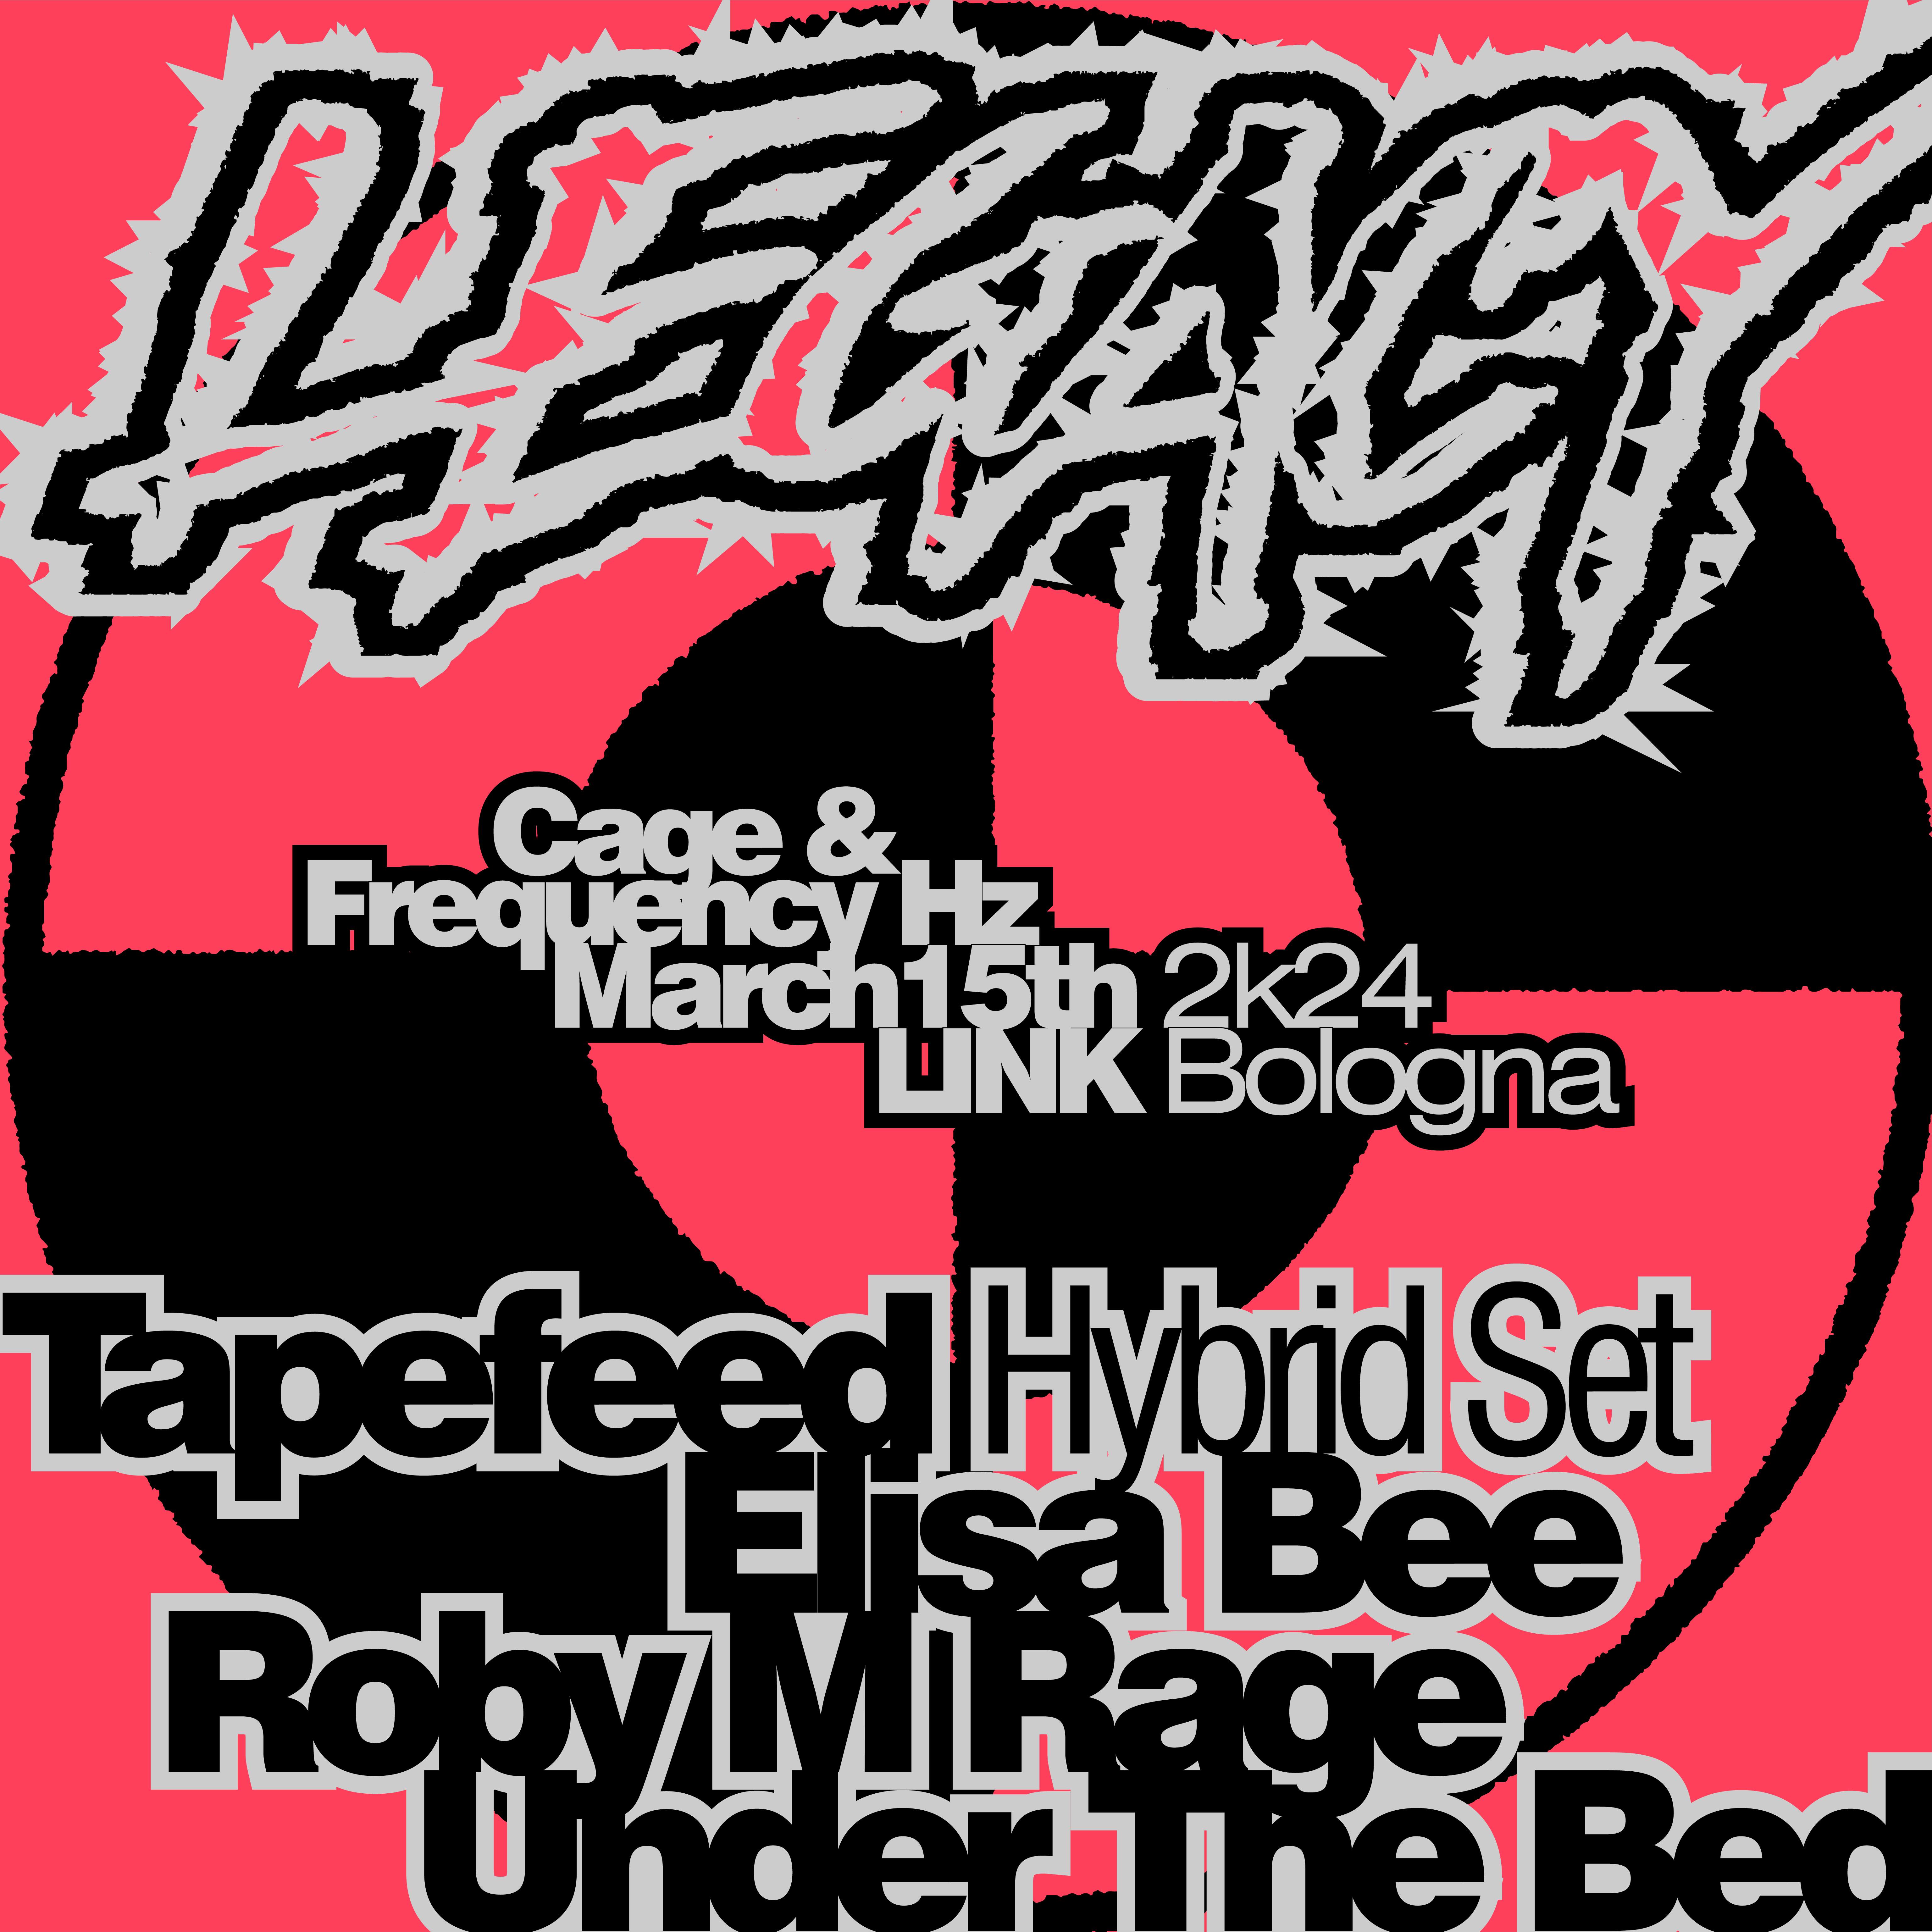 Cage & Frequency Hz presents 'LEGACY' - フライヤー表